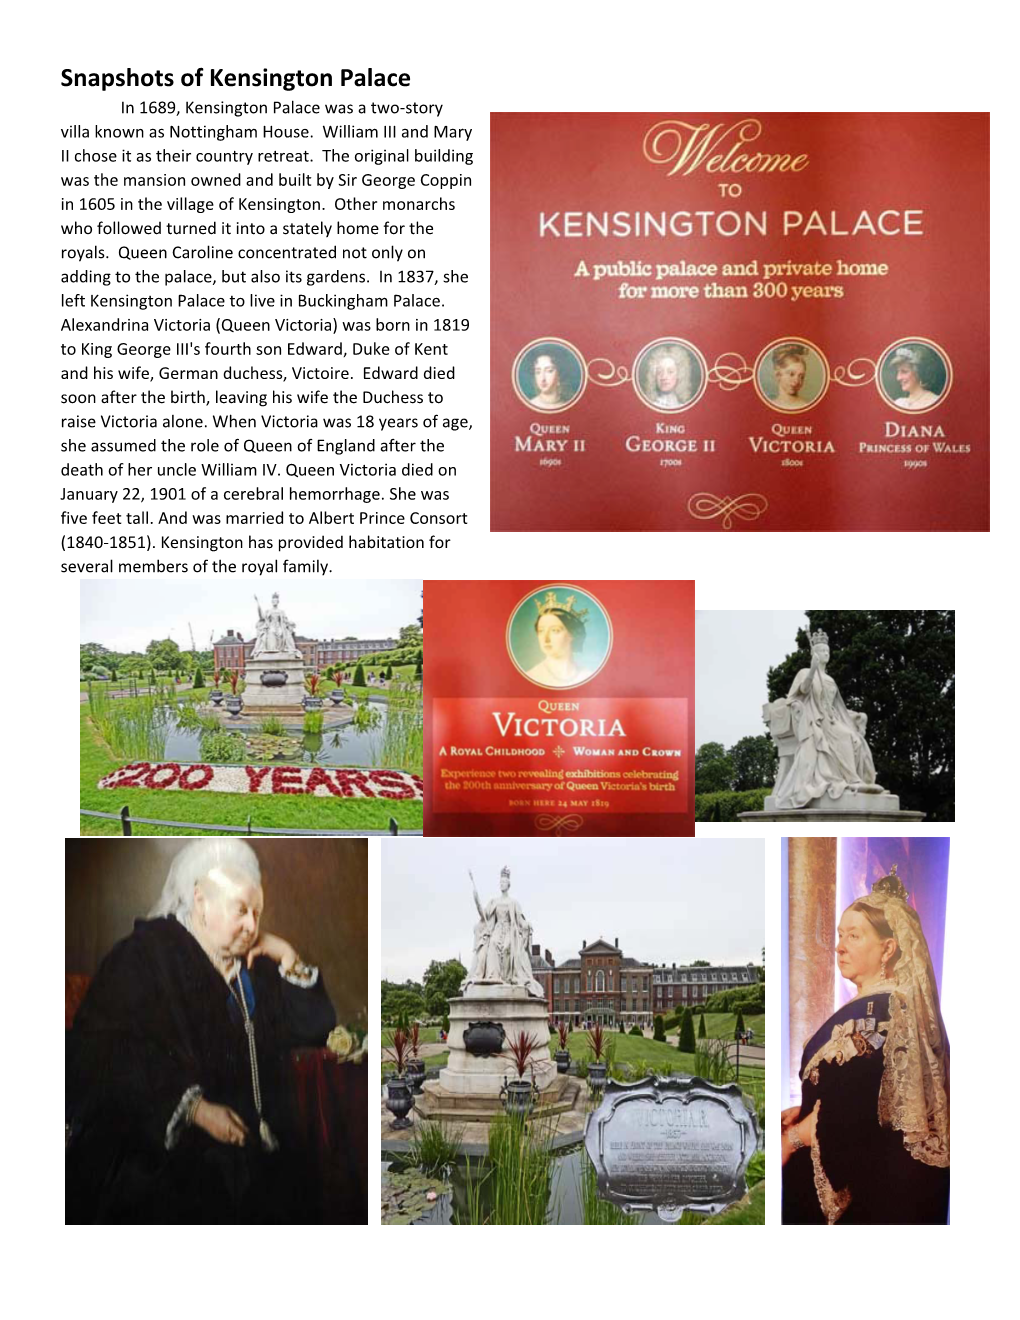 Snapshots of Kensington Palace in 1689, Kensington Palace Was a Two‐Story Villa Known As Nottingham House